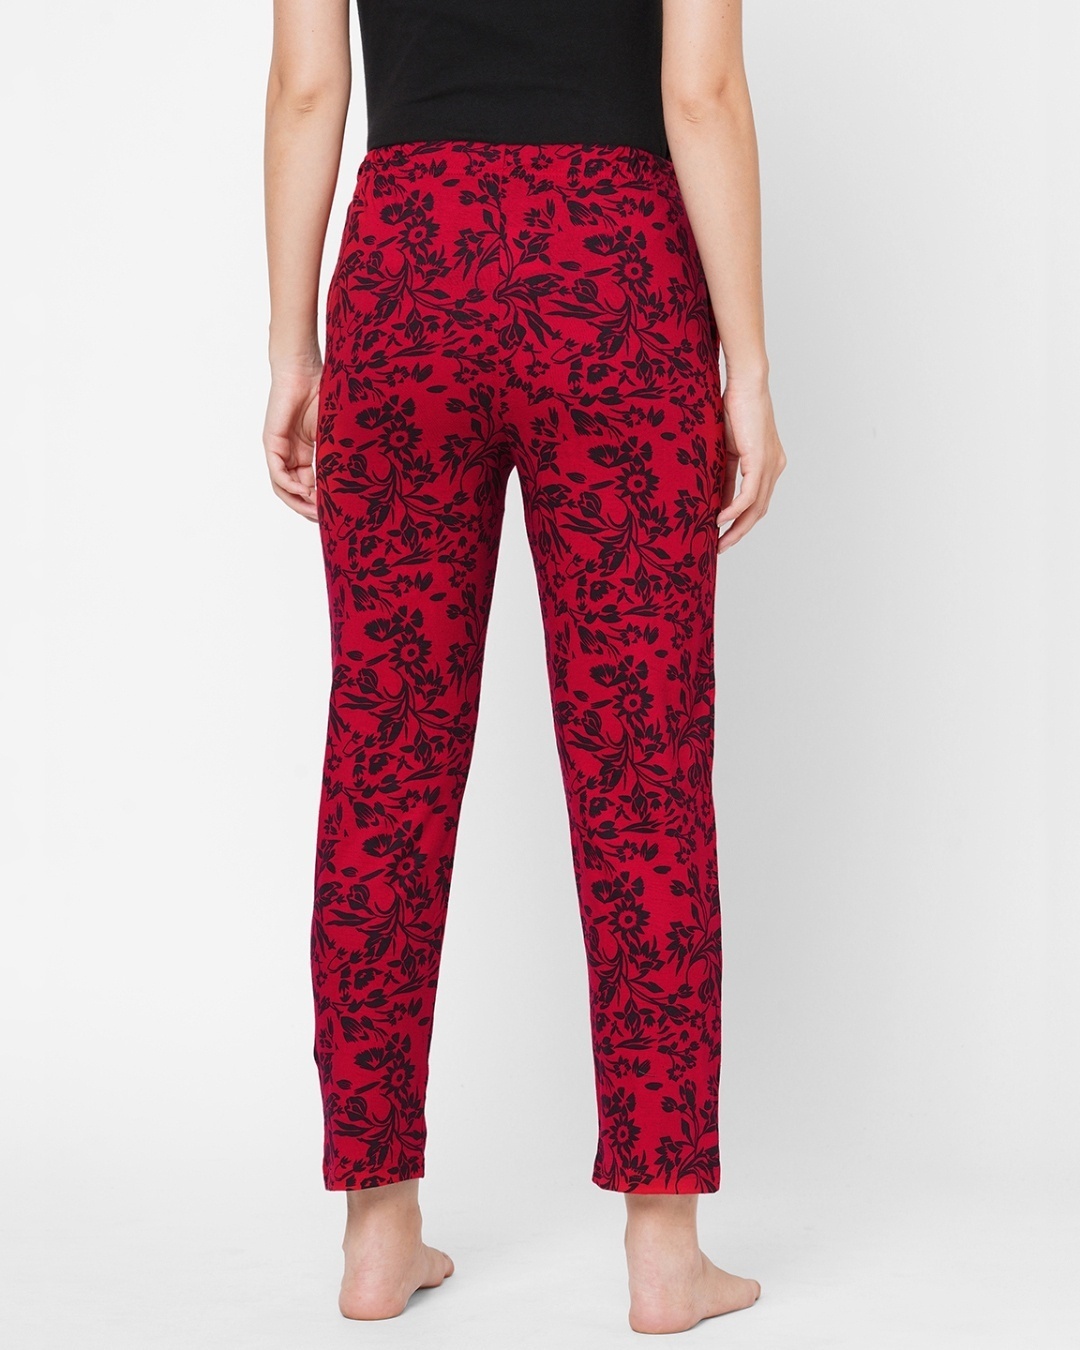 Shop Women's Red All Over Floral Printed Lounge Pants-Design